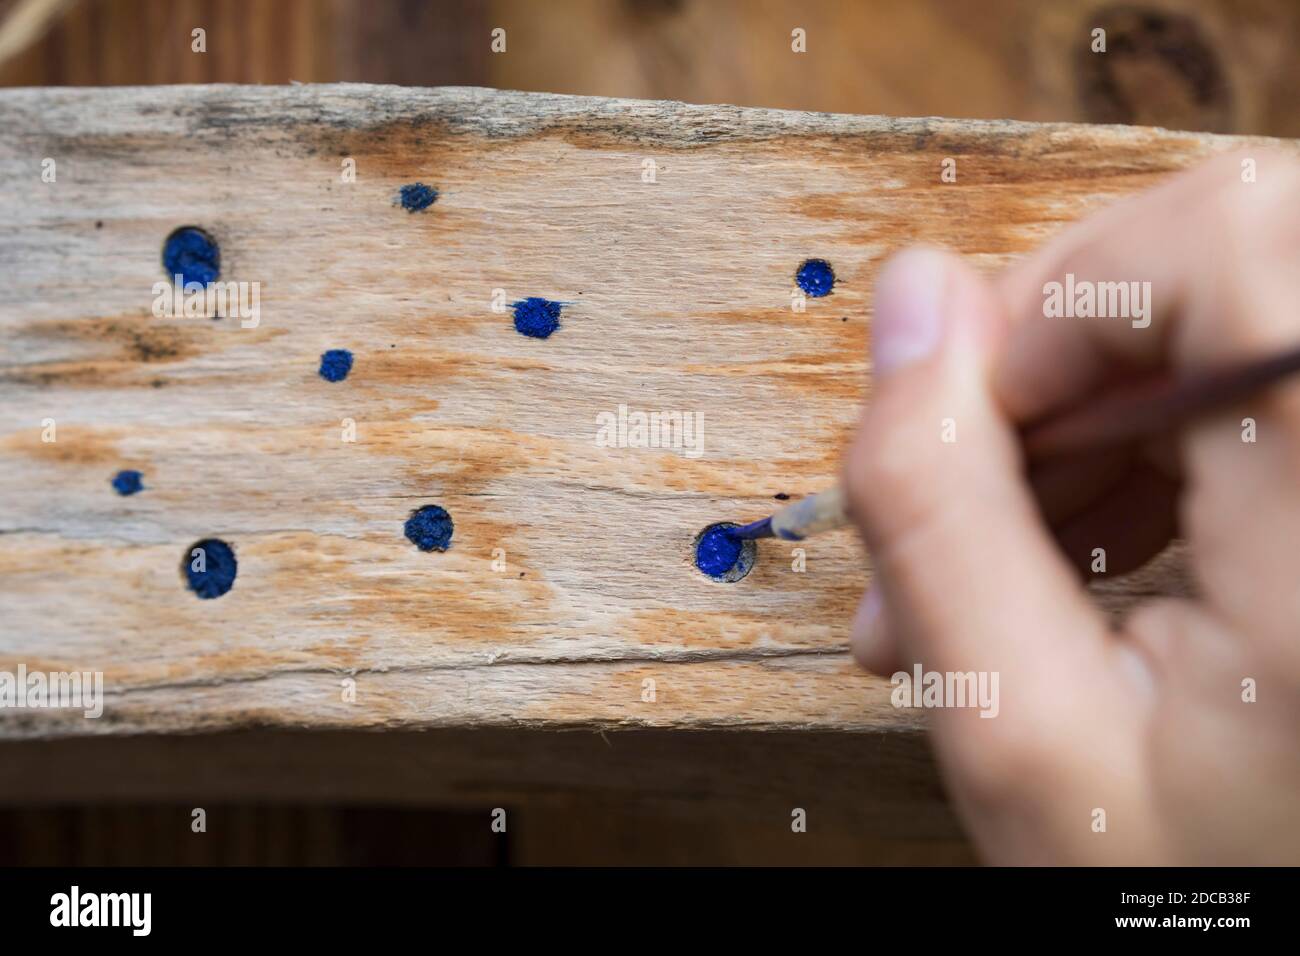 Wild bee nesting aid, nest fasteners are marked with watercolor to be able to see in the coming year whether bees have hatched, Germany Stock Photo